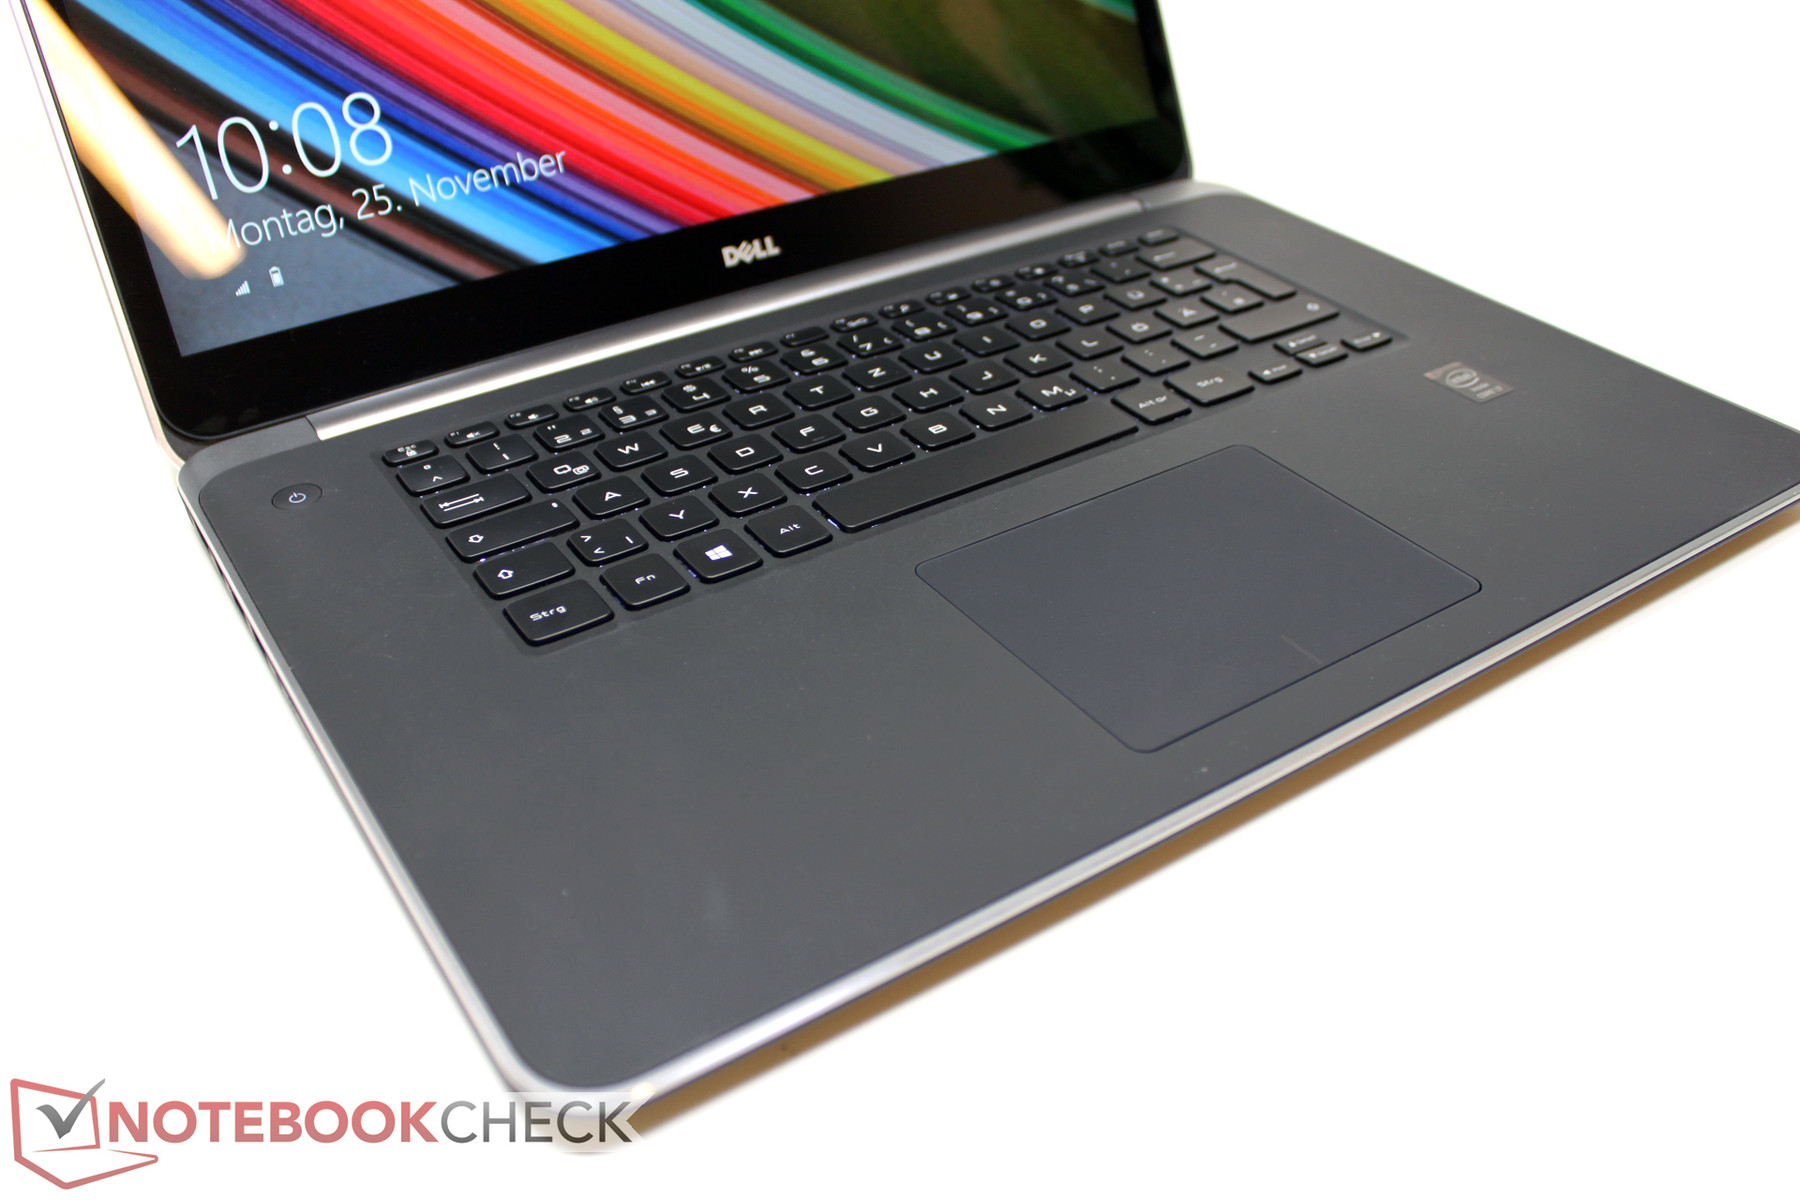 Review Dell XPS 15 (9530, Late 2013) Notebook - NotebookCheck.net Reviews